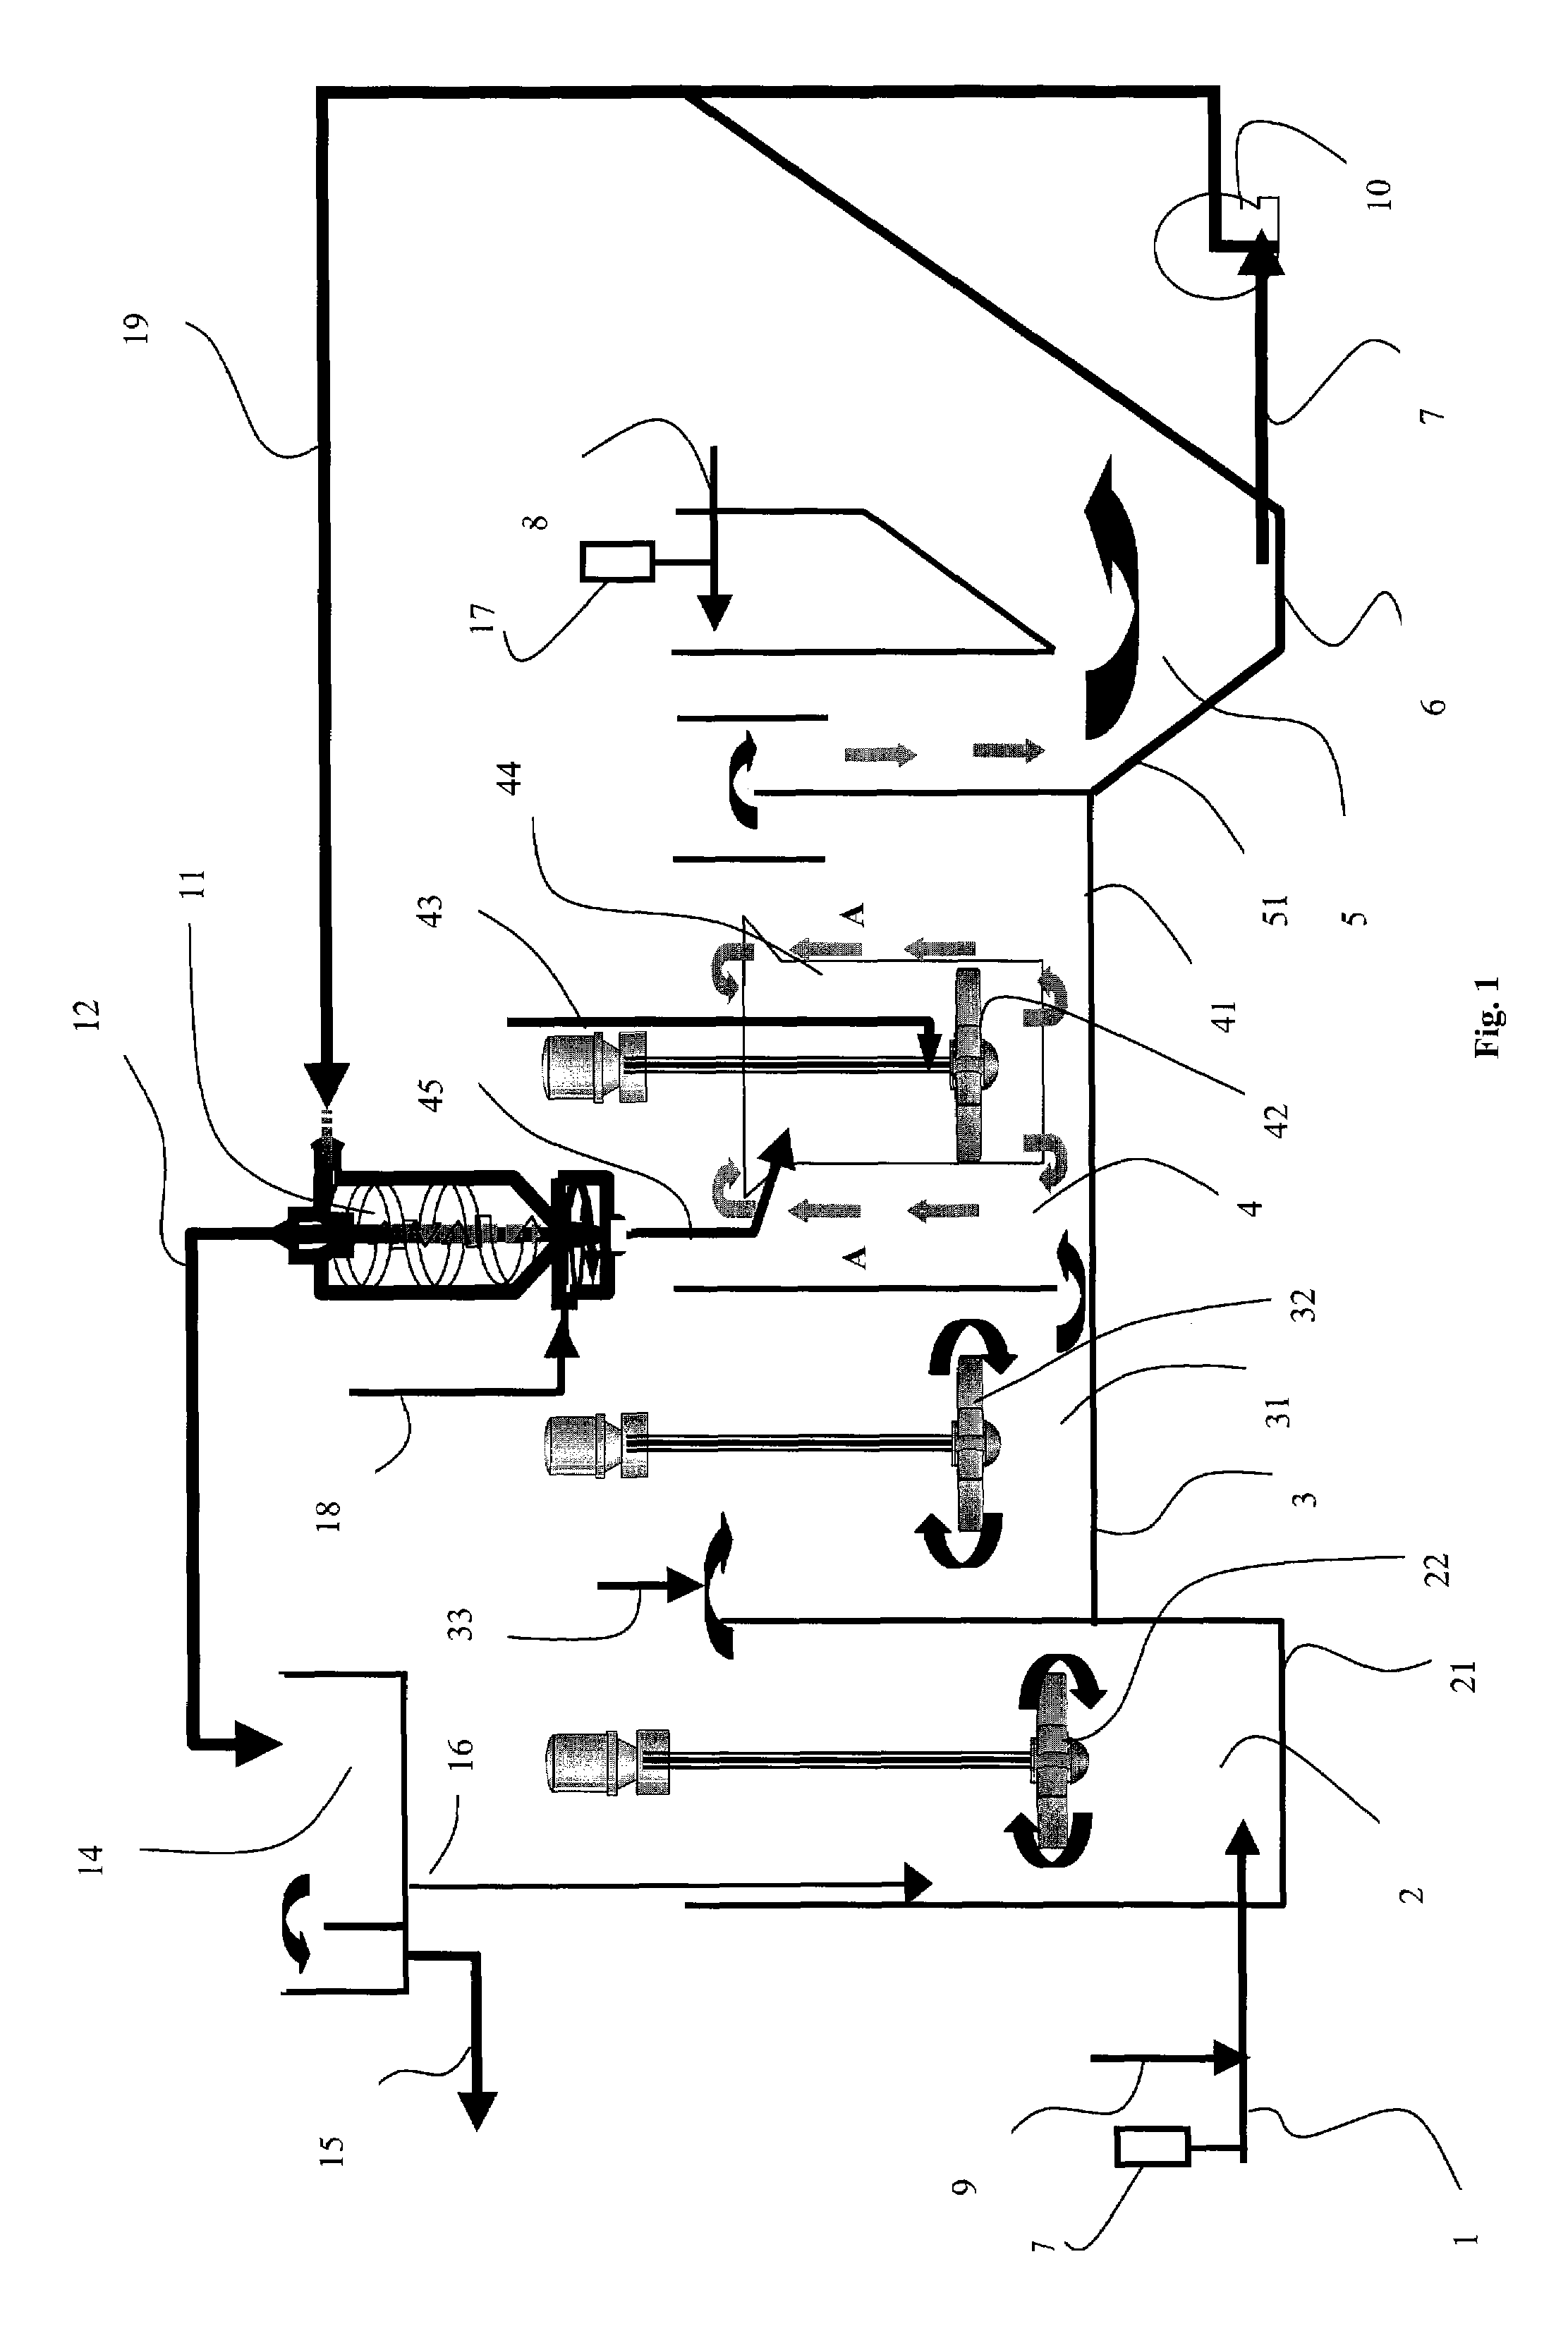 Water treatment method by ballasted flocculation, settling, and prior adsorbent contact